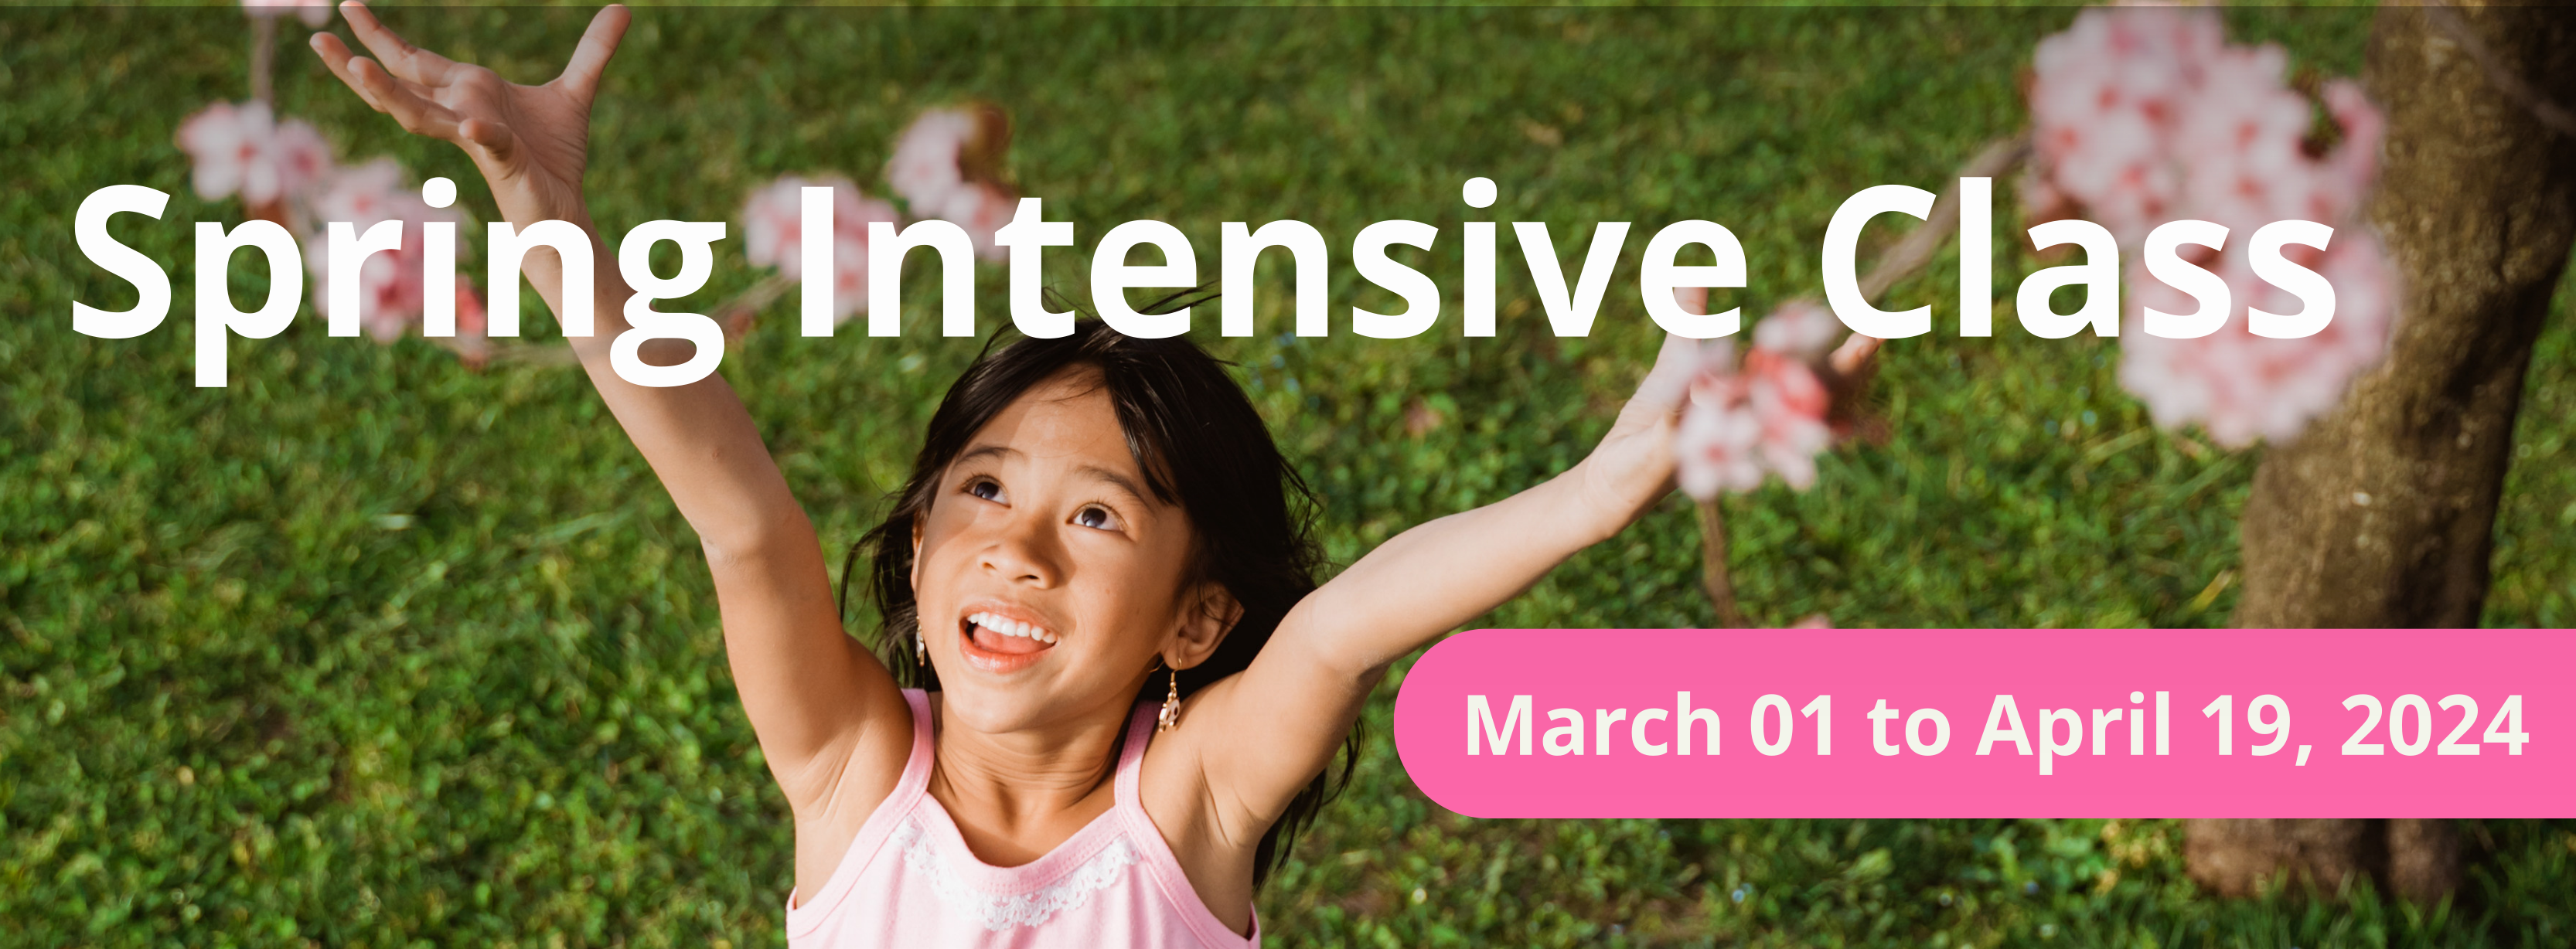 Toranomon Language School - Spring Intensive Class for Kids - Japanese Class from March 01 to April 19, 2024